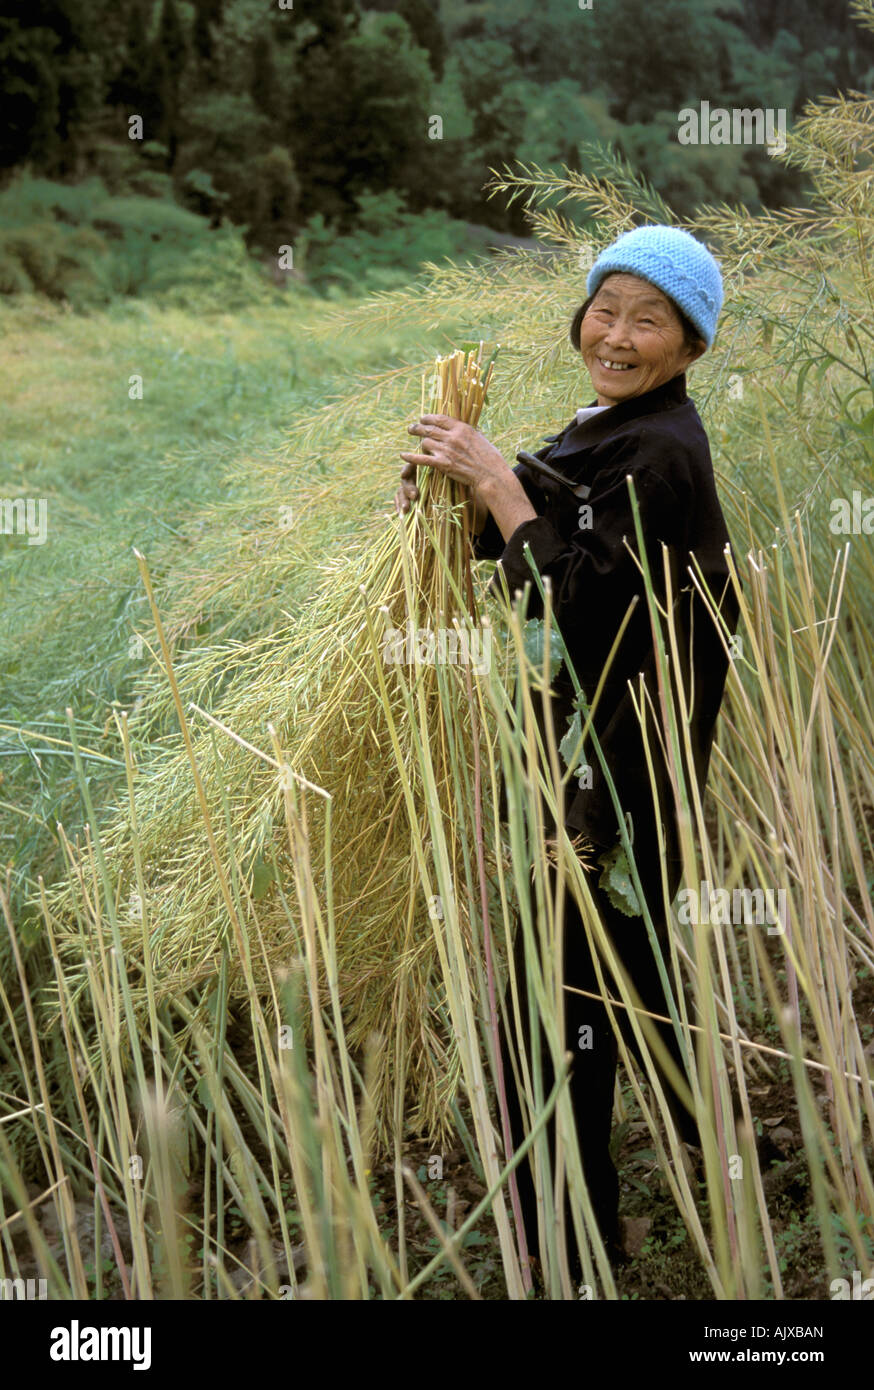 Asia, China, between Zhongxian and Wanxian. Woman cutting canola stalks to stack and dry Stock Photo